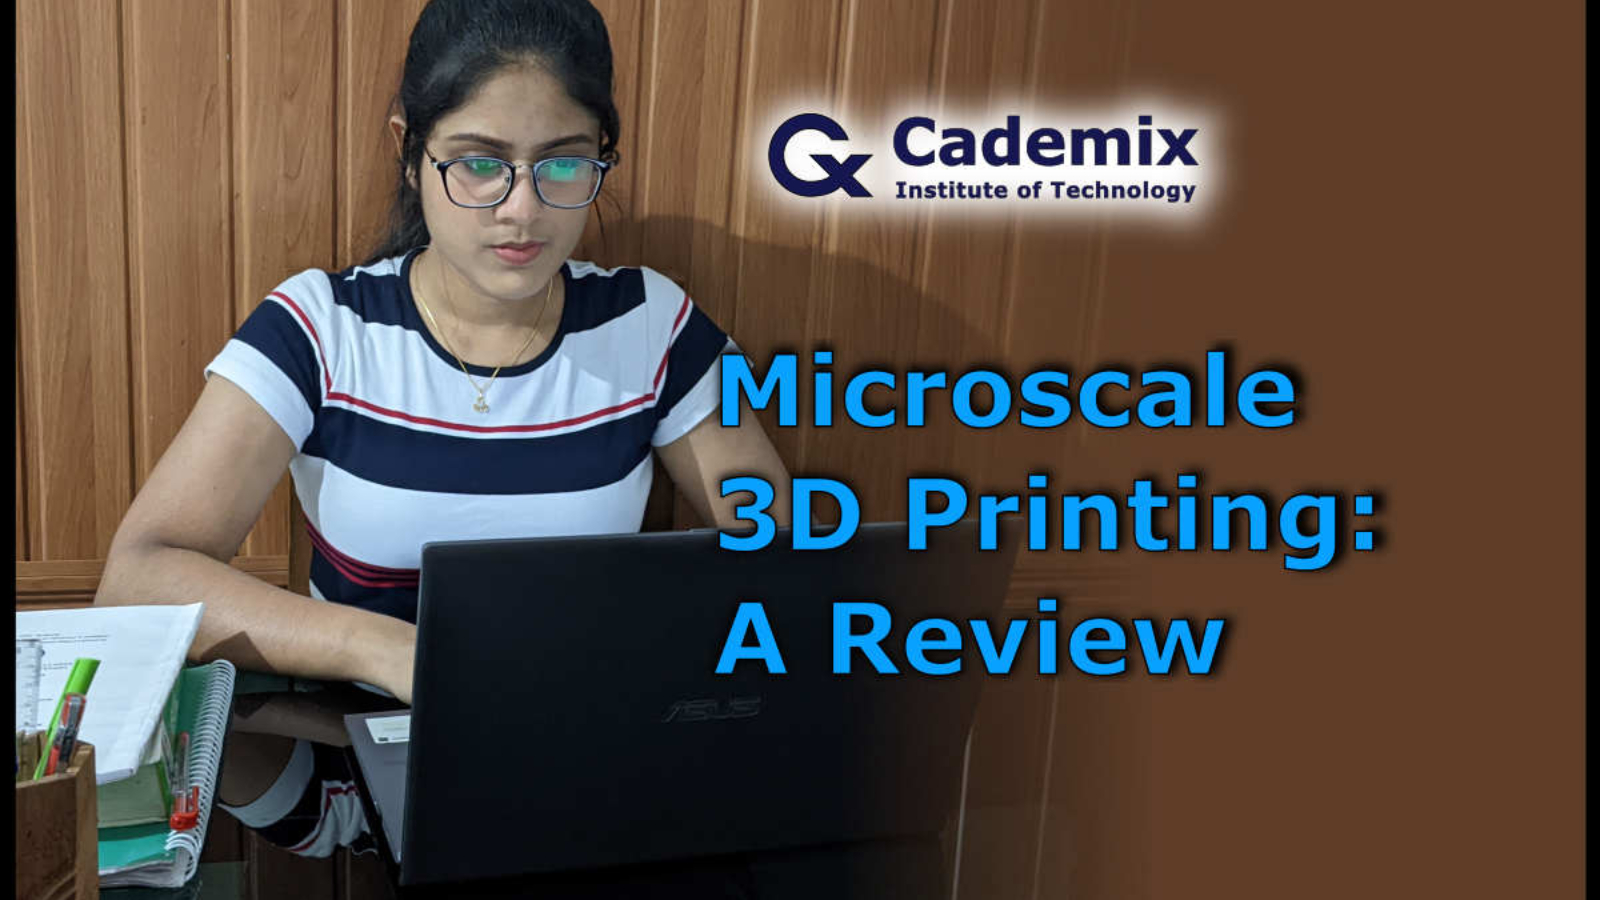 microscale 3D printing- featured image